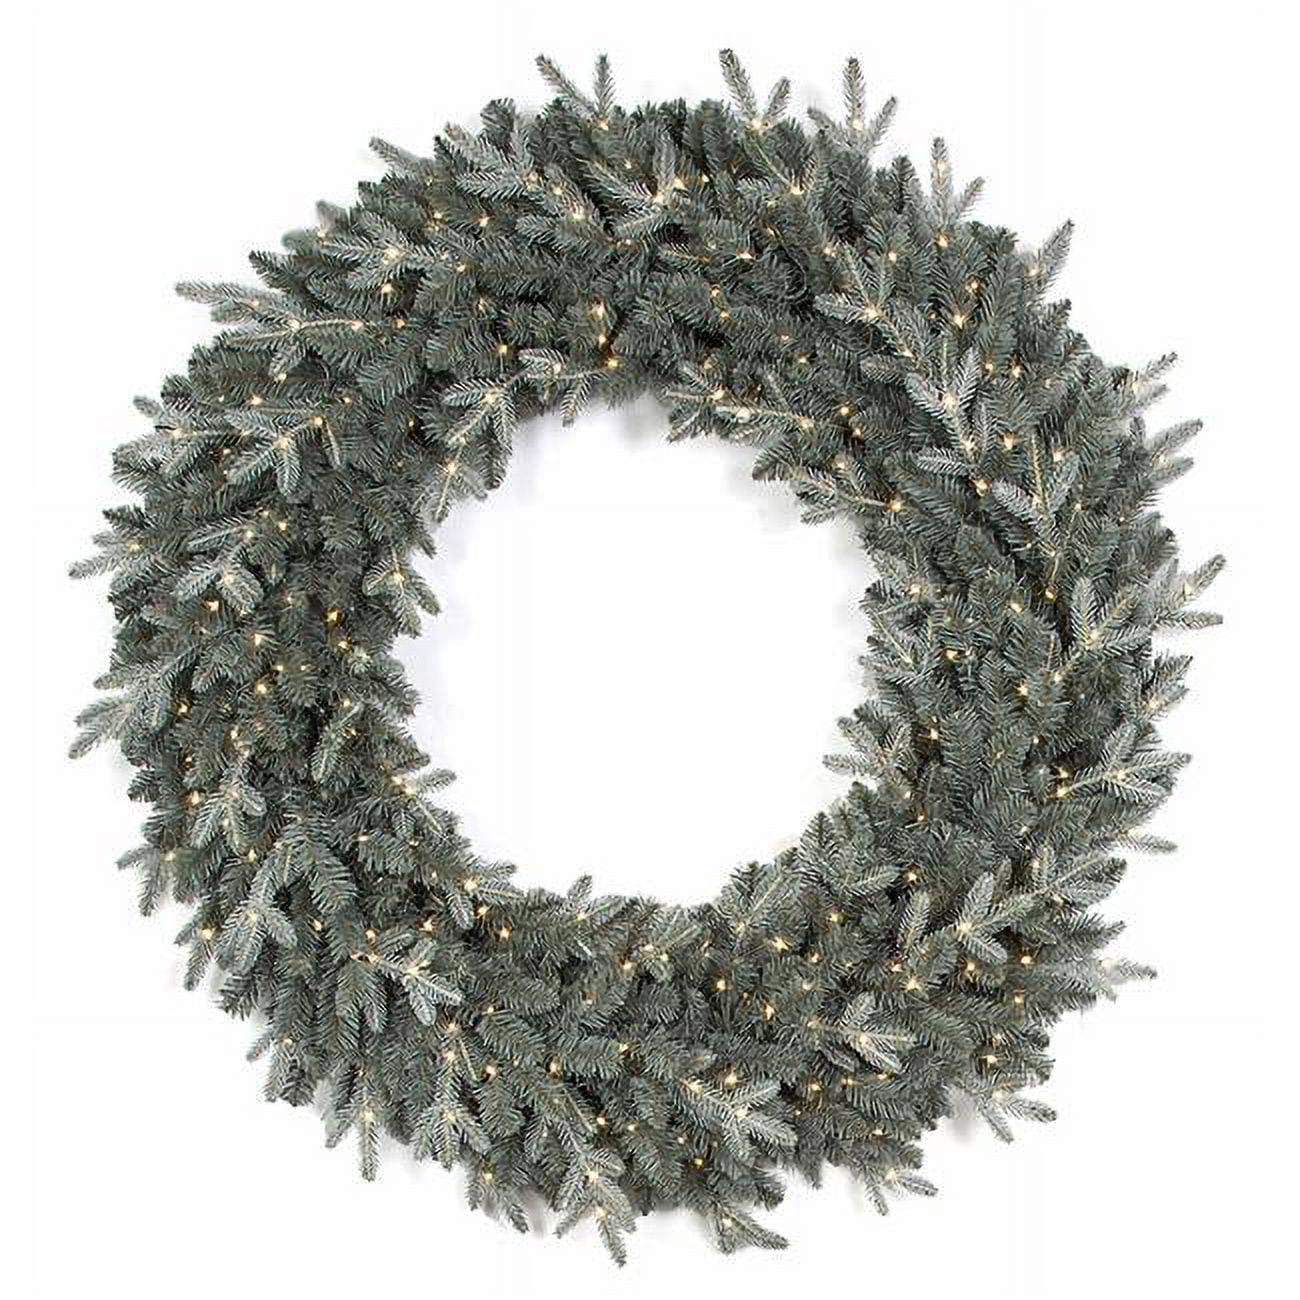 Picture of Autograph Foliages C-195074 36 in. Appalachian Fir Wreath with Twinkle Rice Lights, Light Blue